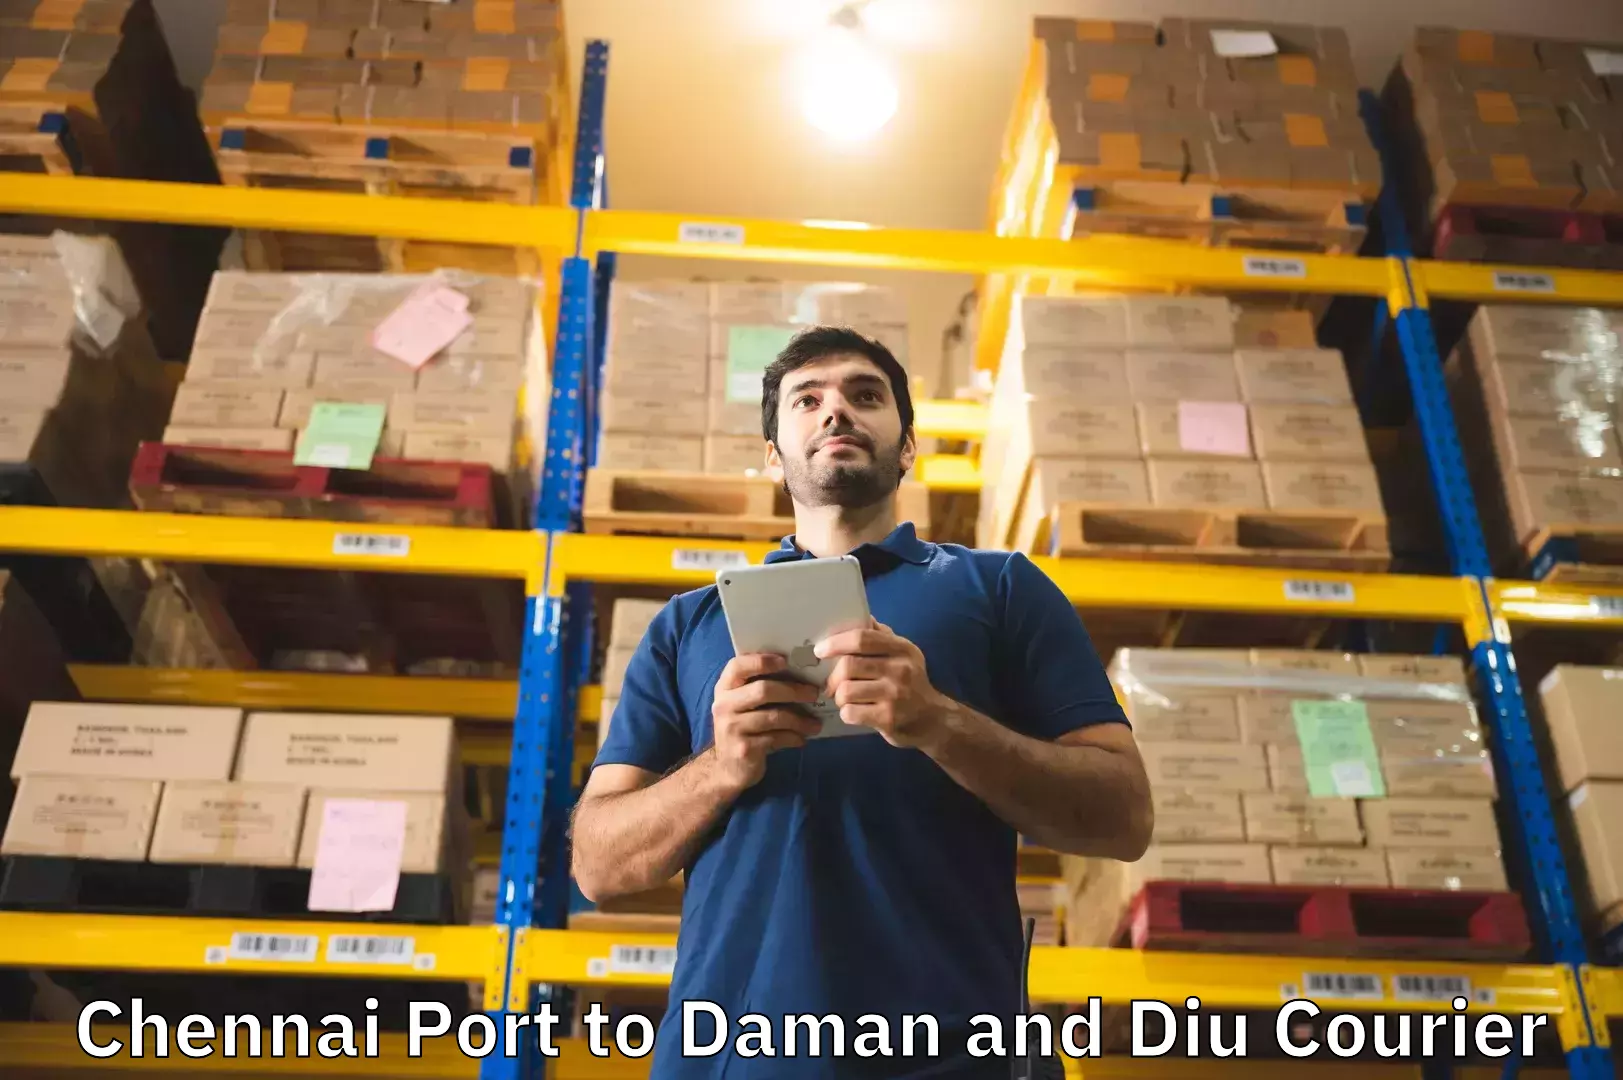 Instant baggage transport quote Chennai Port to Daman and Diu